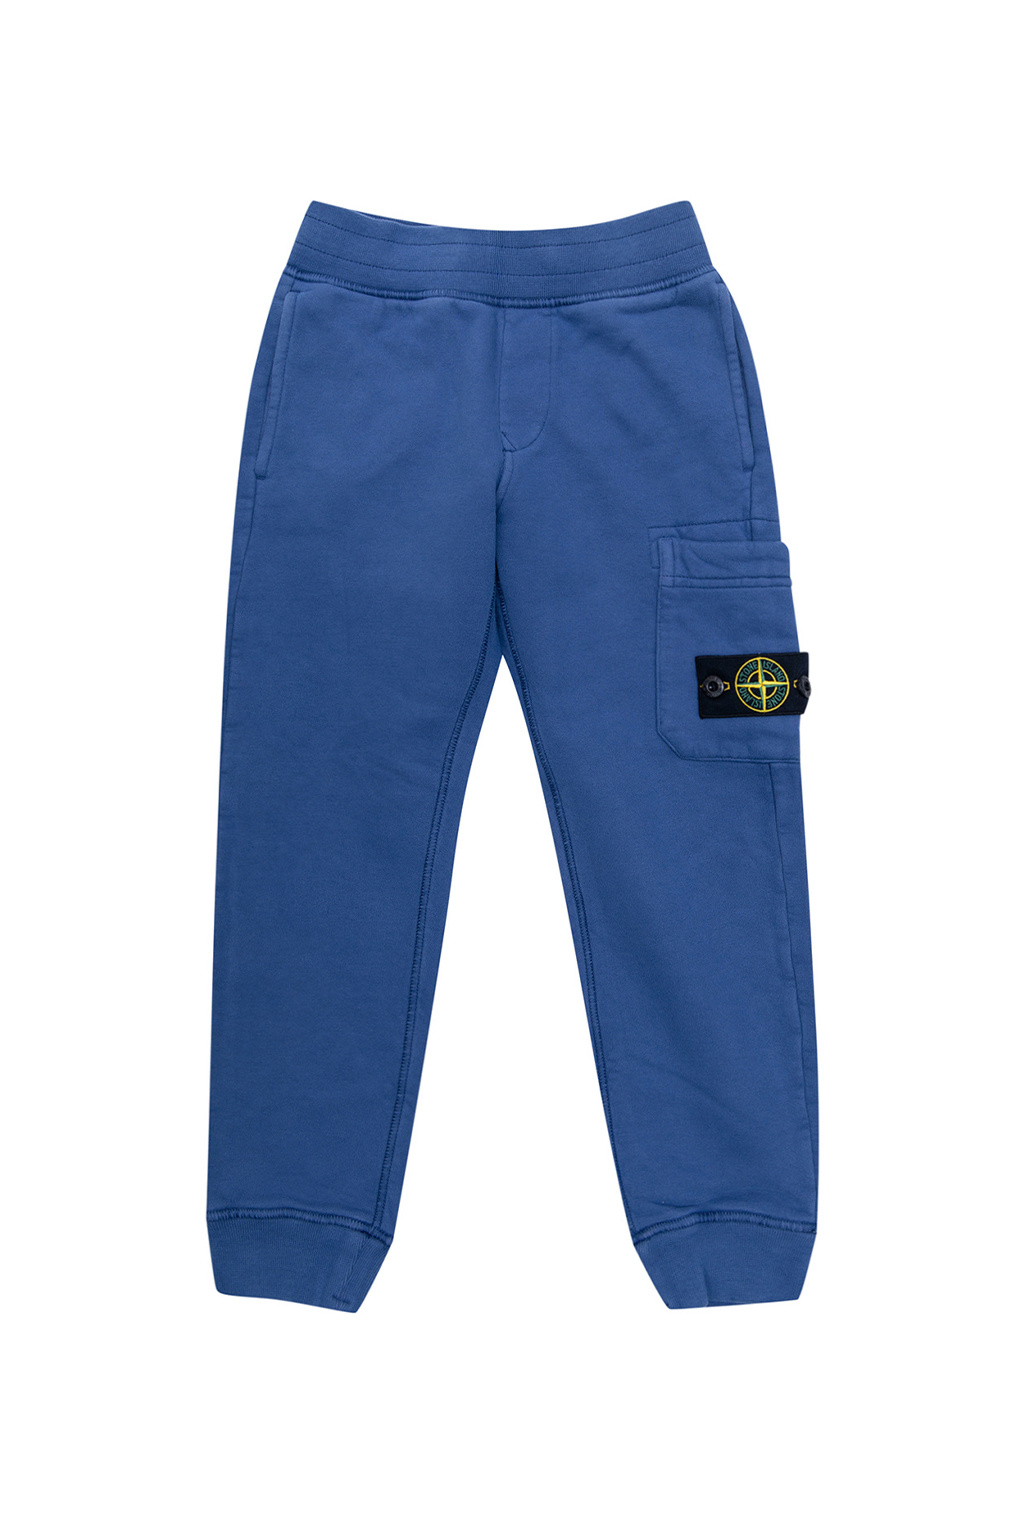 Stone Island Kids Cars Jeans Garcon manches longues